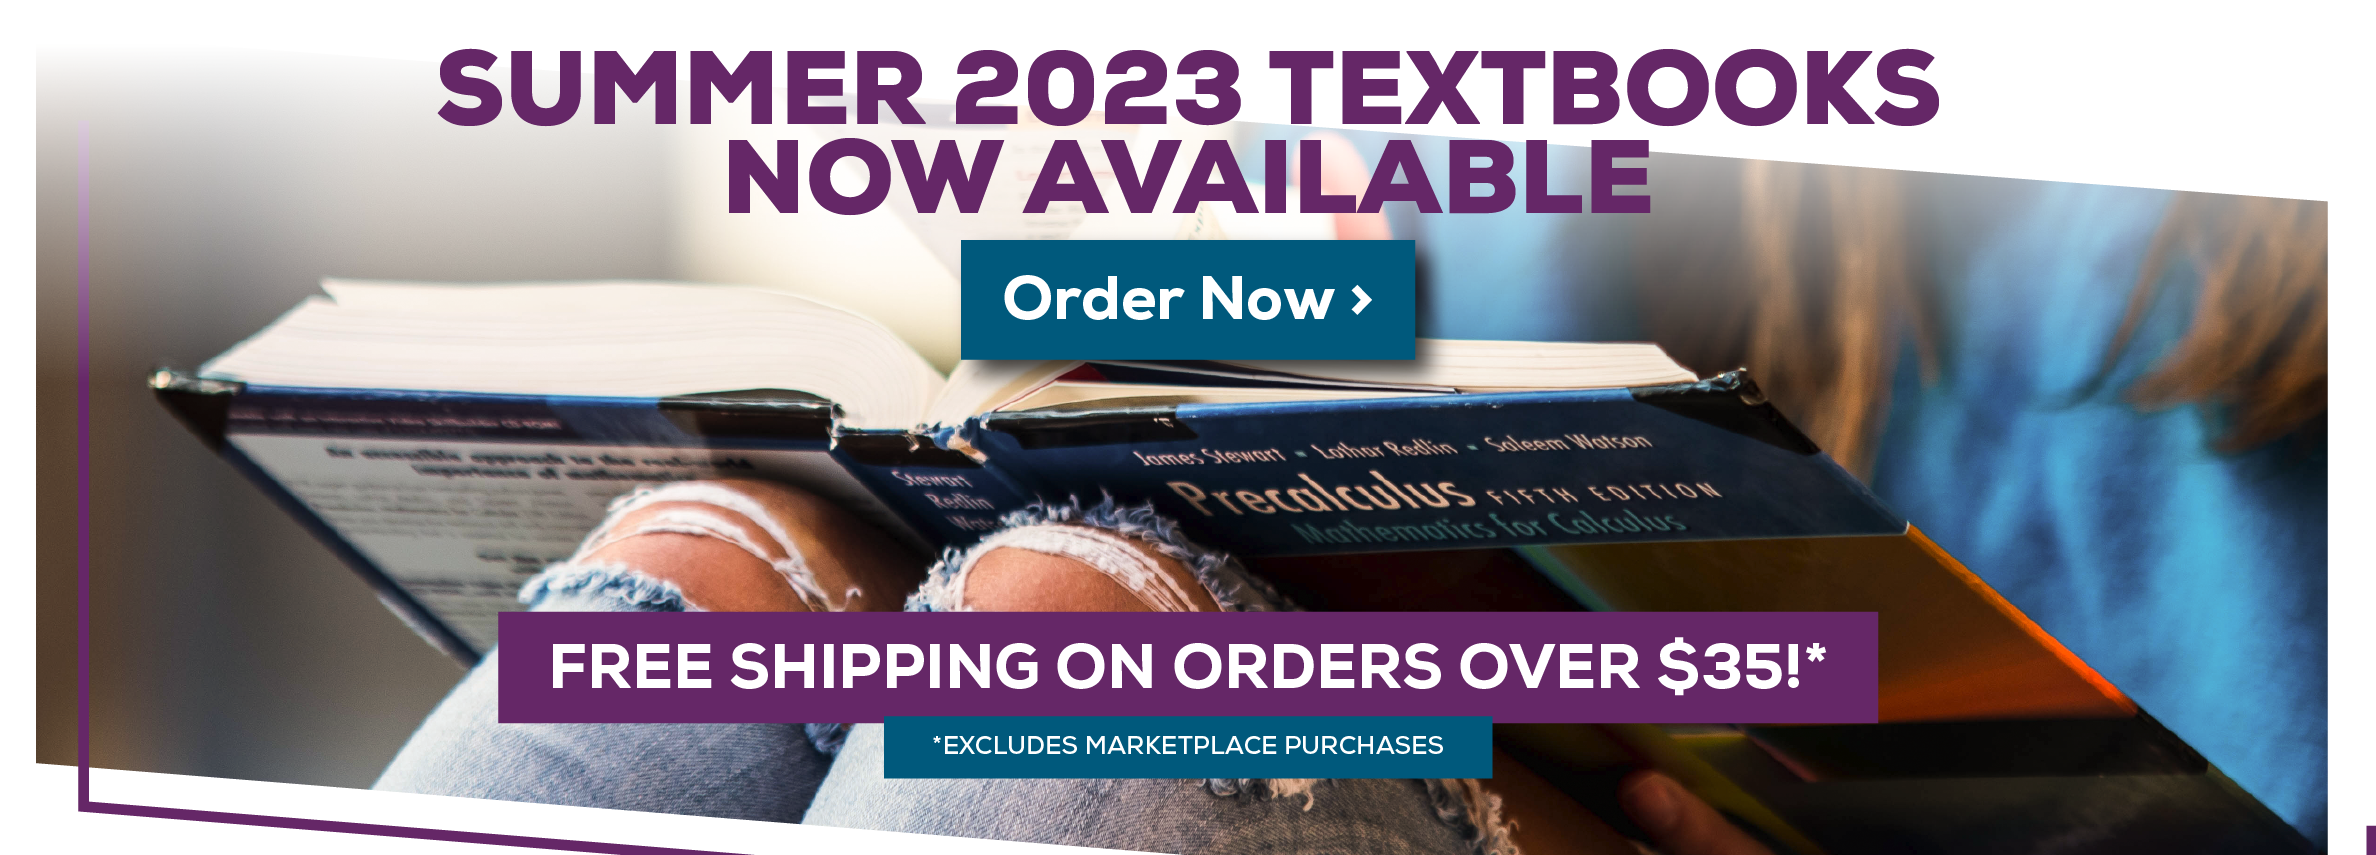 SUMMER 2023 TEXTBOOKS NOW AVAILABLE Order Now Ã‚Â» Lahar getlin - Soleom Warson SISTA CONTION Nor Calculus FREE SHIPPING ON ORDERS OVER $35!* *EXCLUDES MARKETPLACE PURCHASES